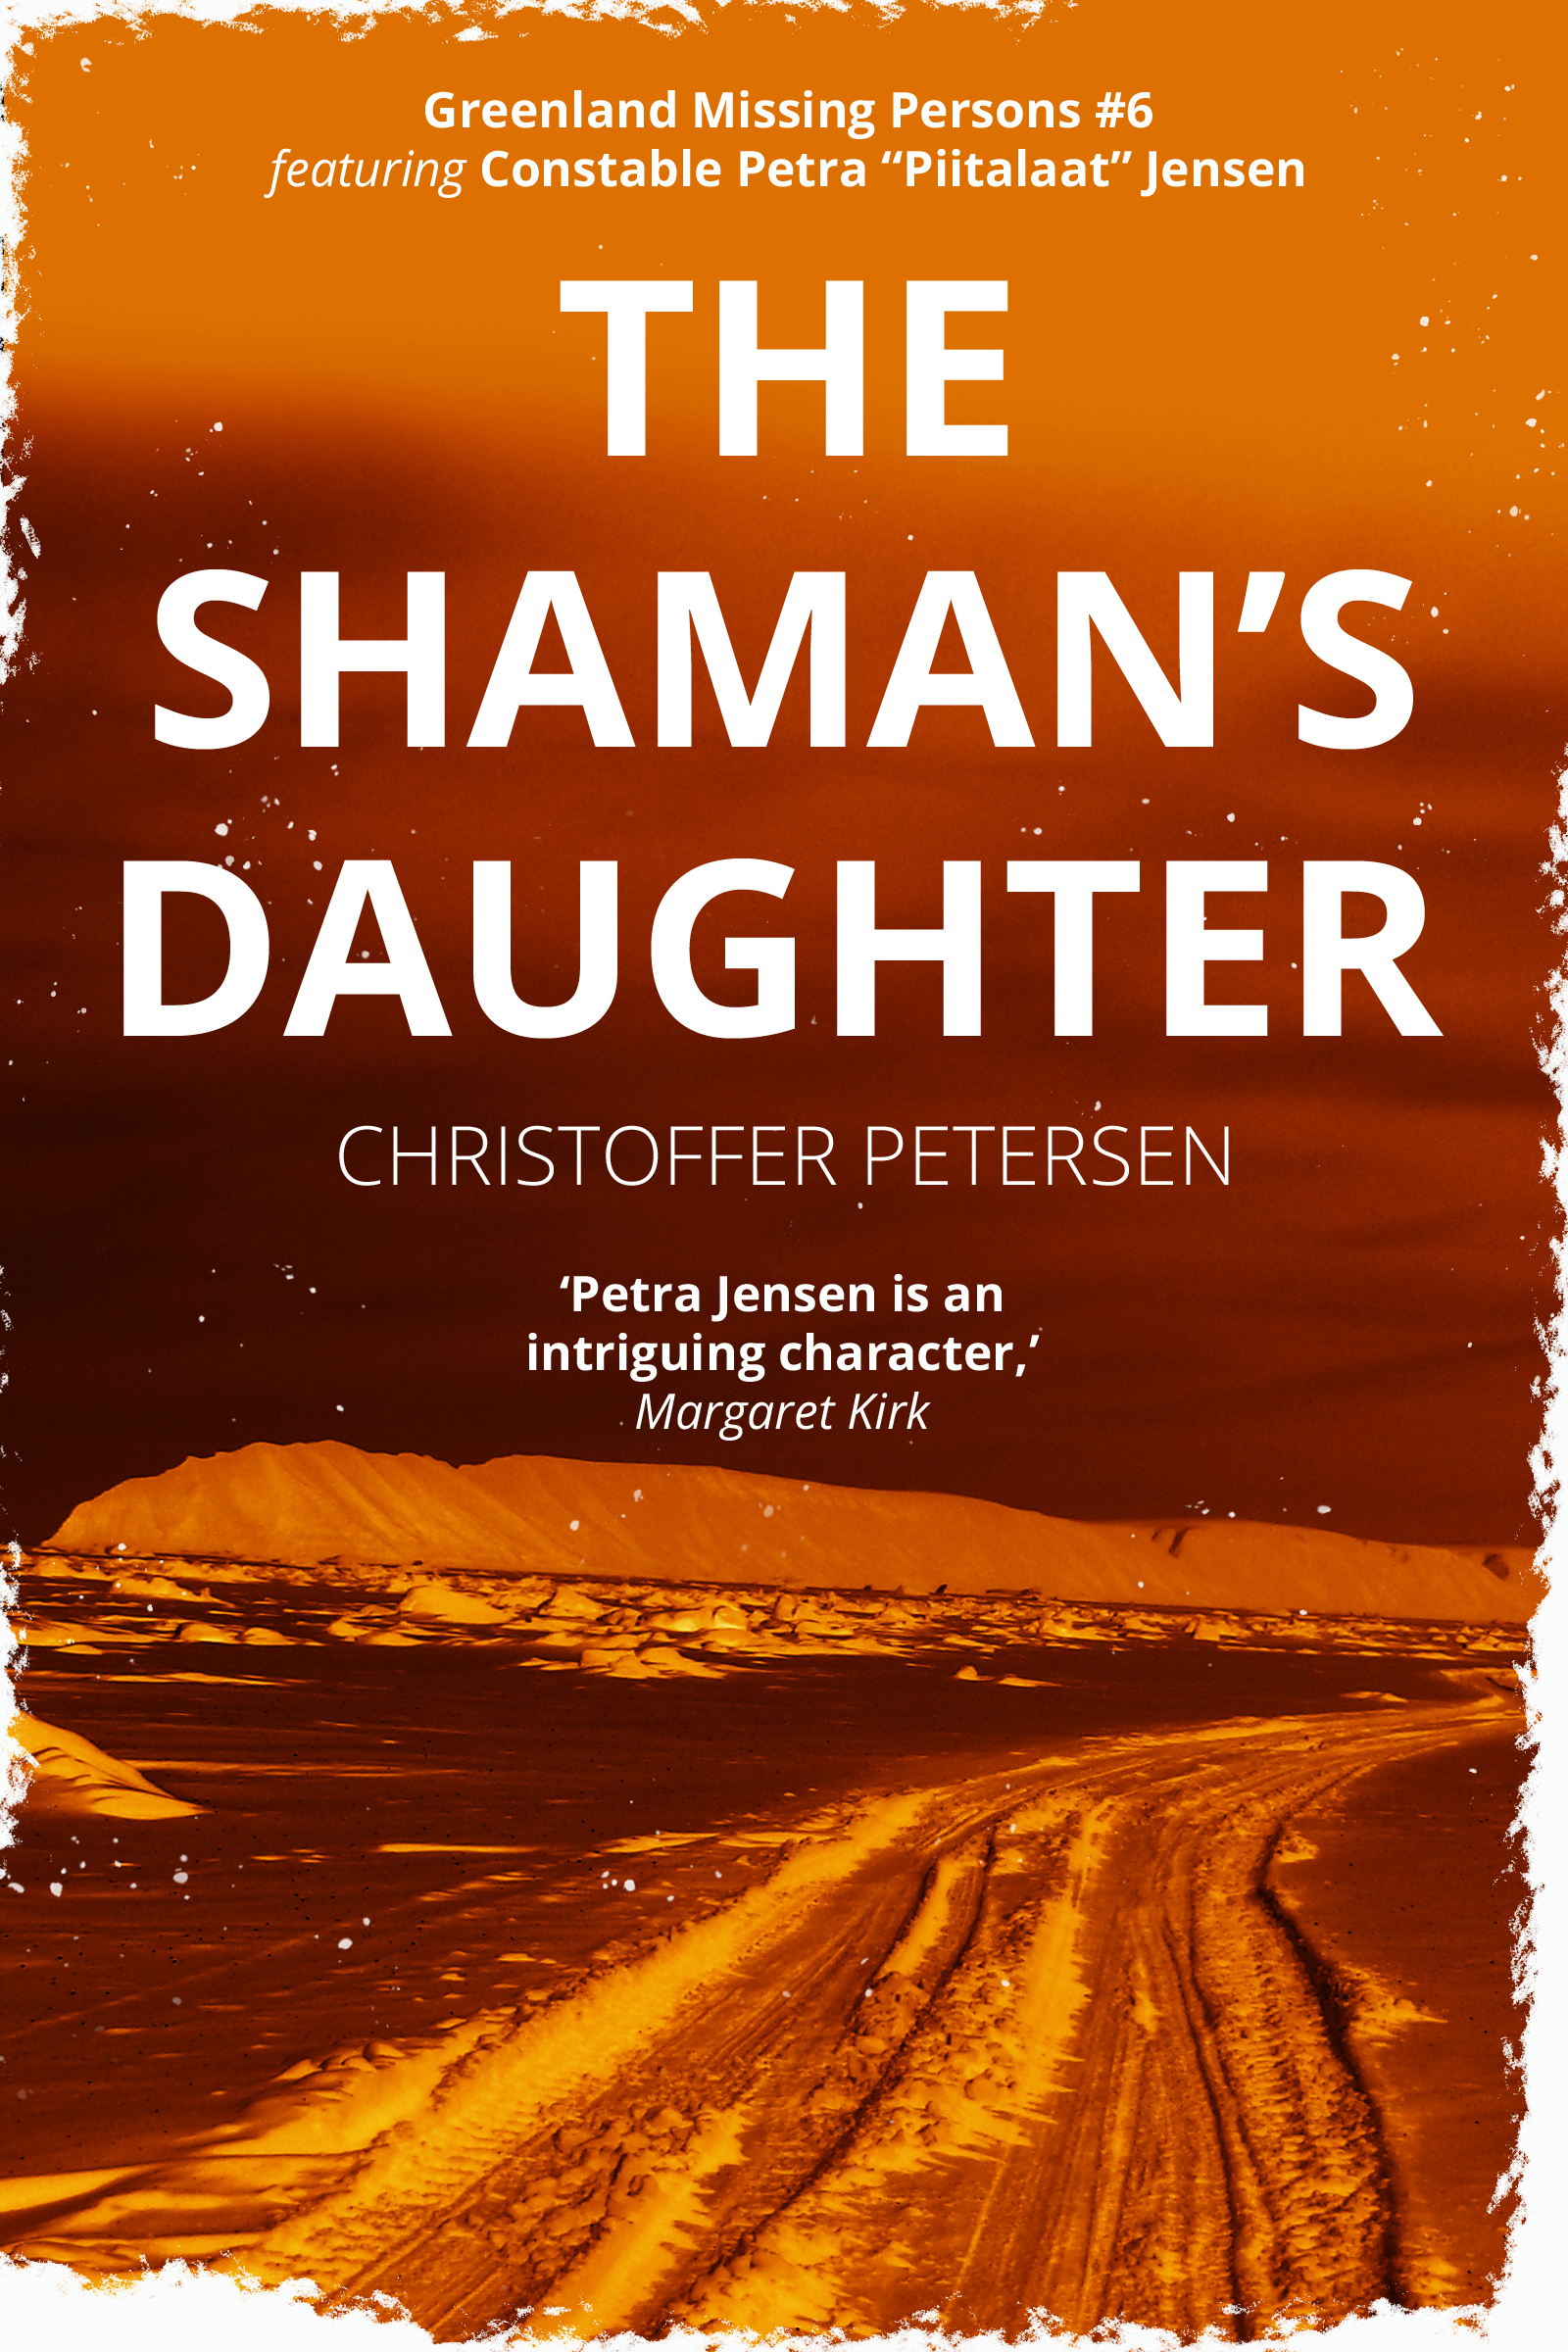 The Shaman’s Daughter (Greenland Missing Persons #6)